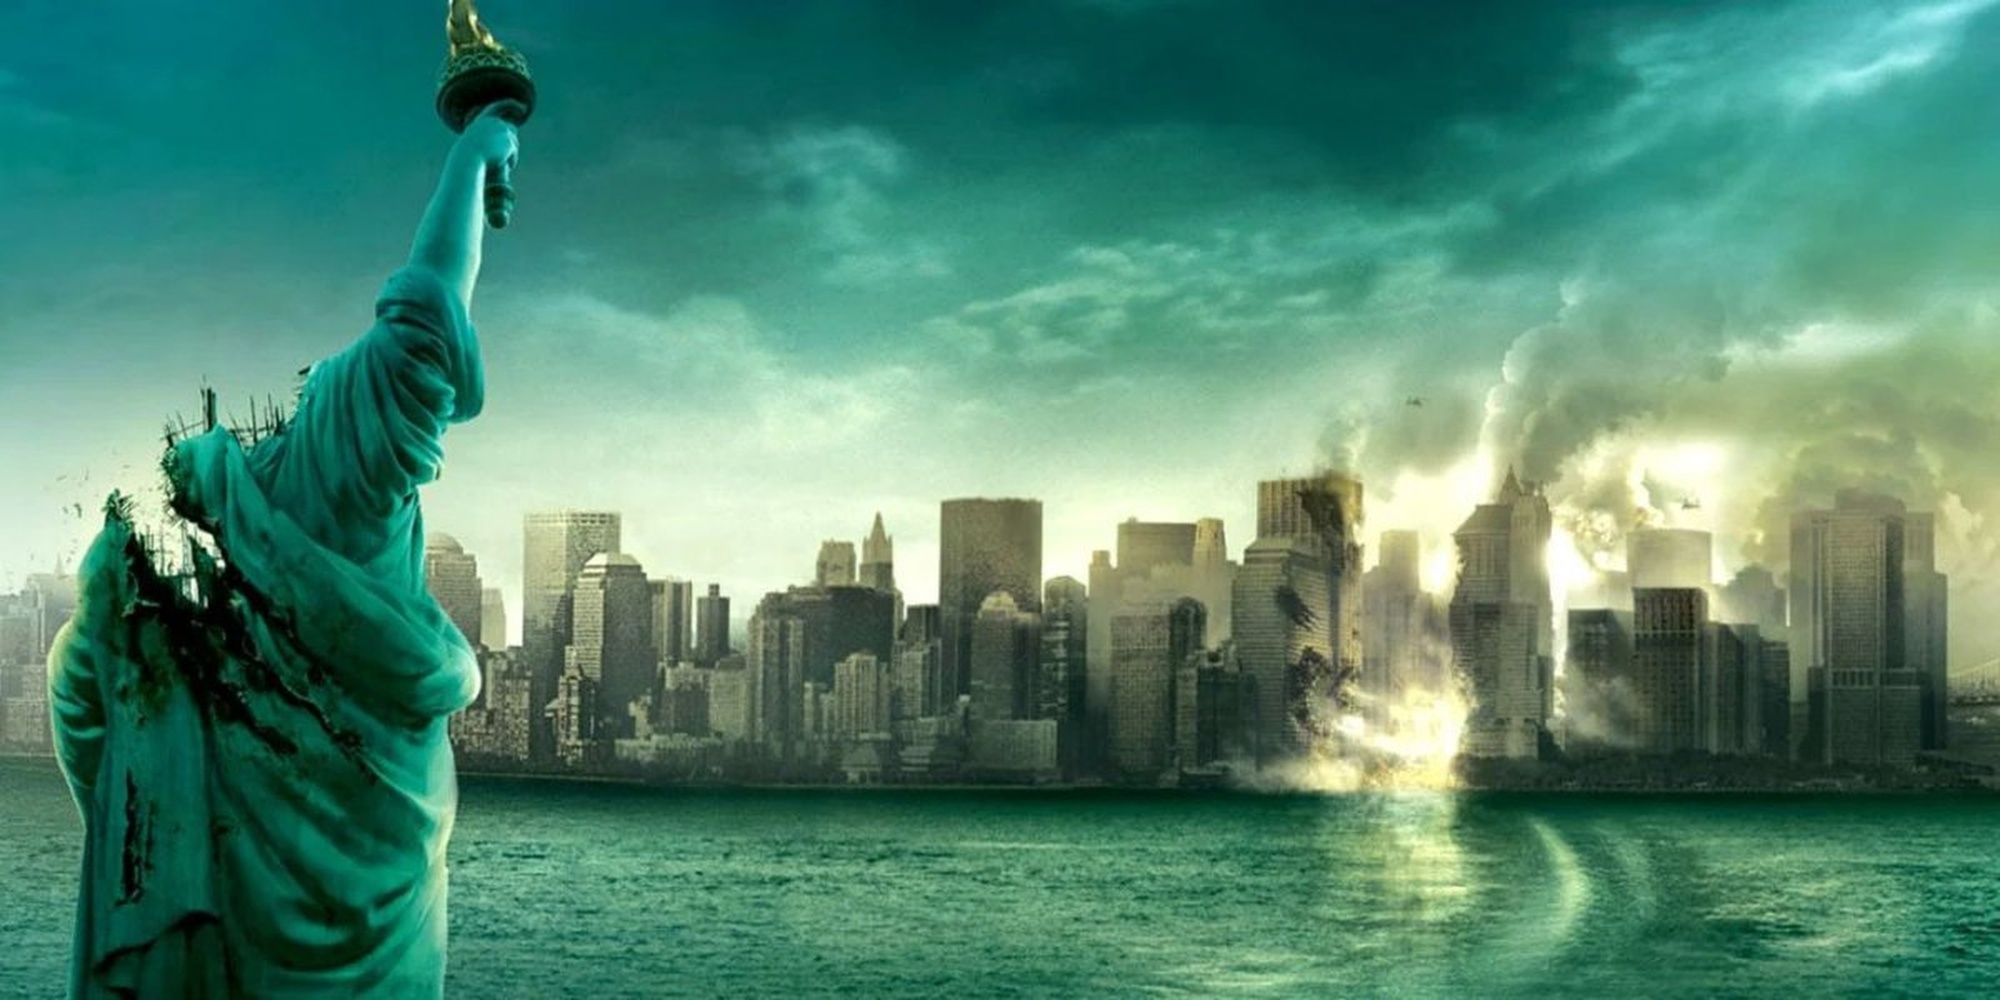 Poster for 'Cloverfield' featuring New York City and the Statue of Liberty